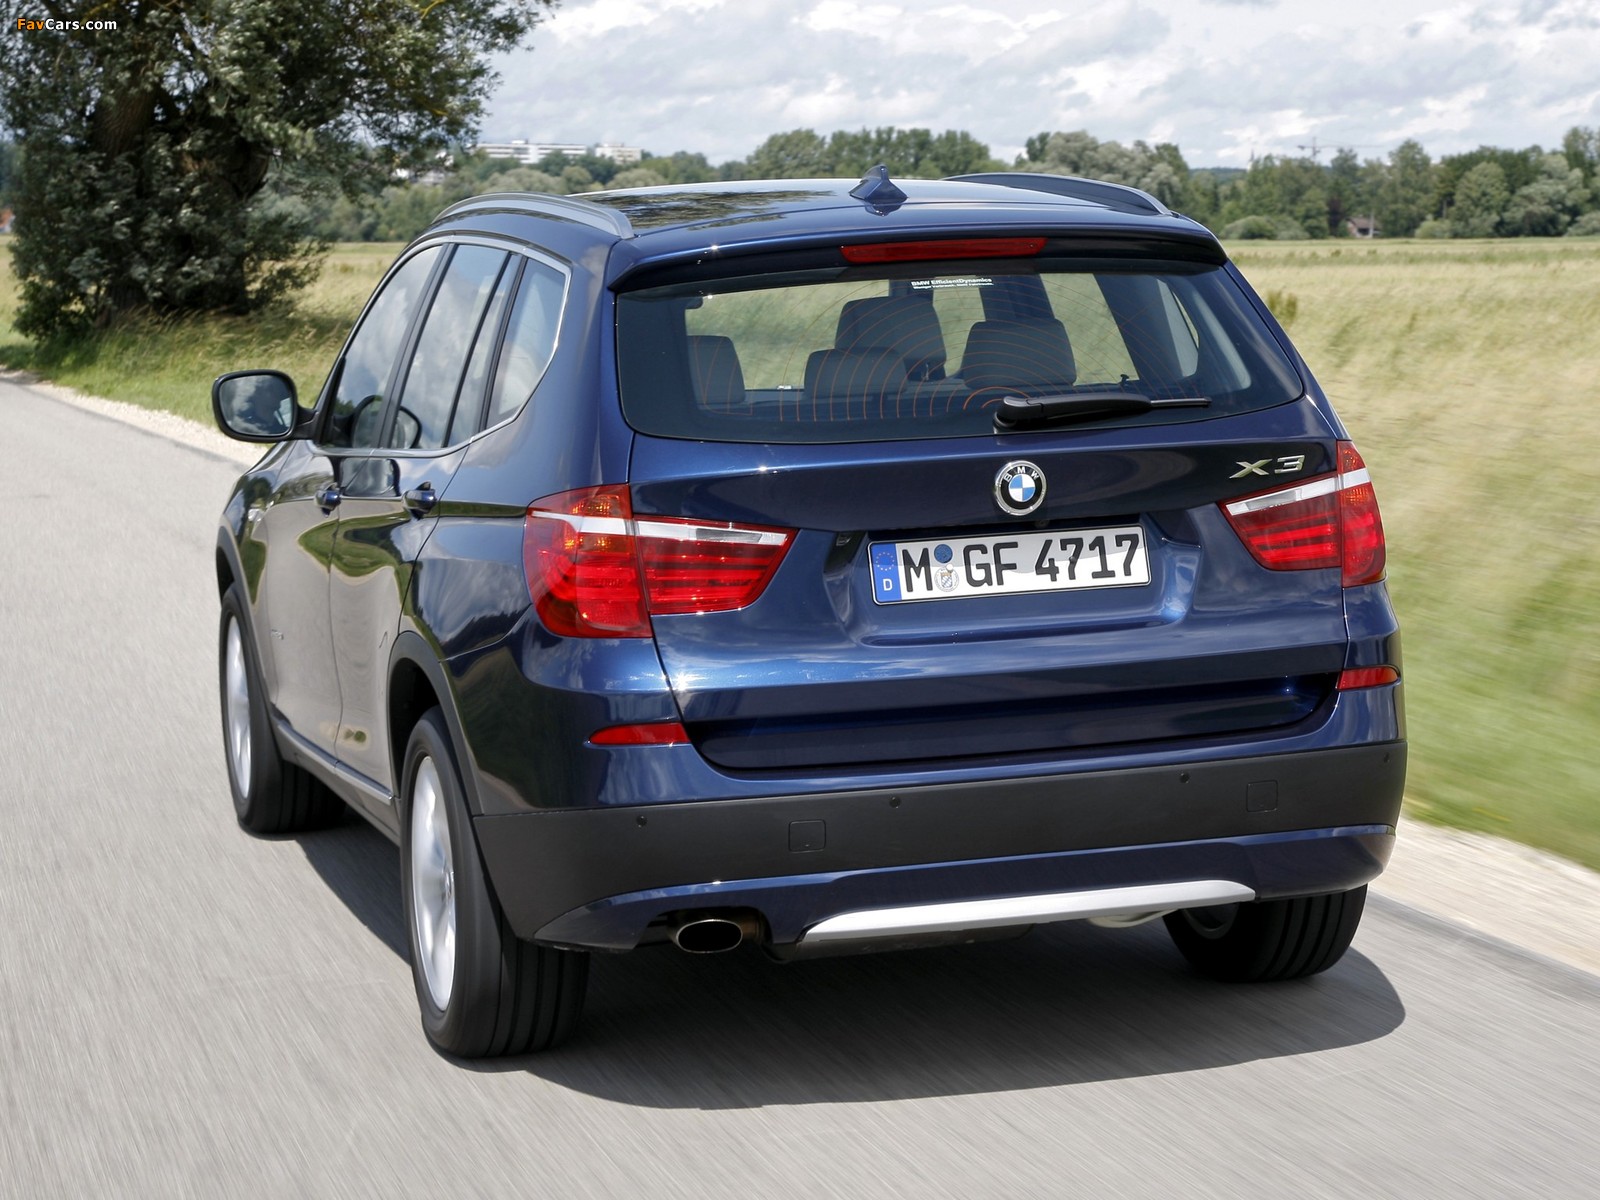 BMW X3 xDrive20i (F25) 2011 pictures (1600 x 1200)